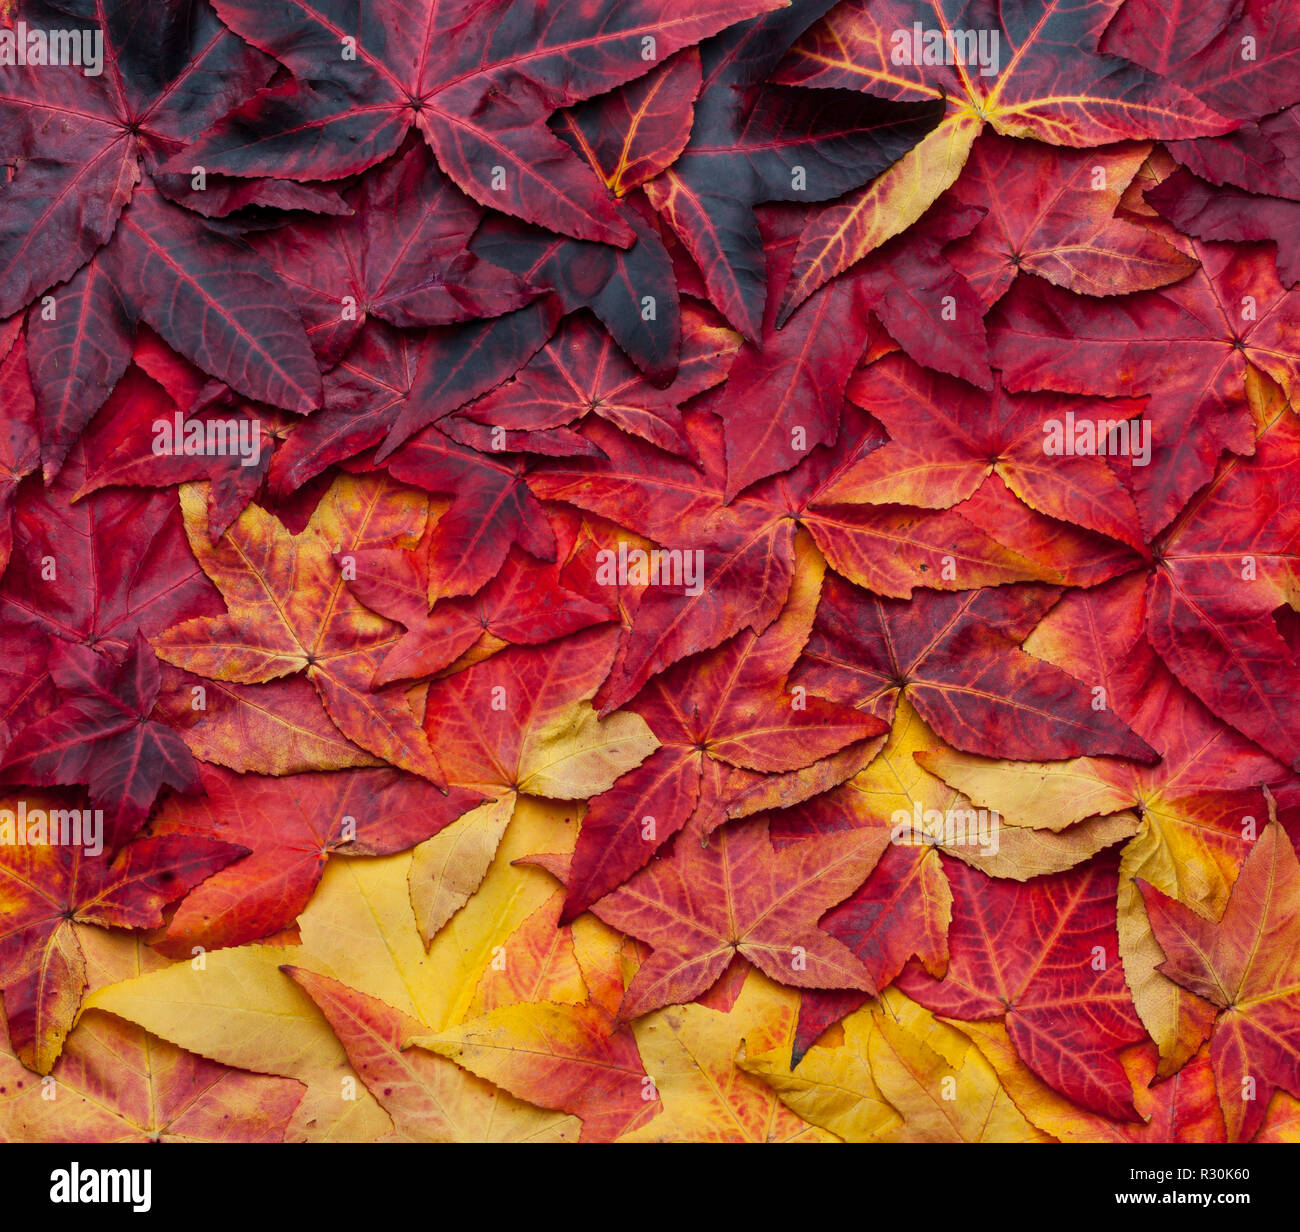 Beautiful collage background of autumn leaves from yellow to dark red Stock Photo